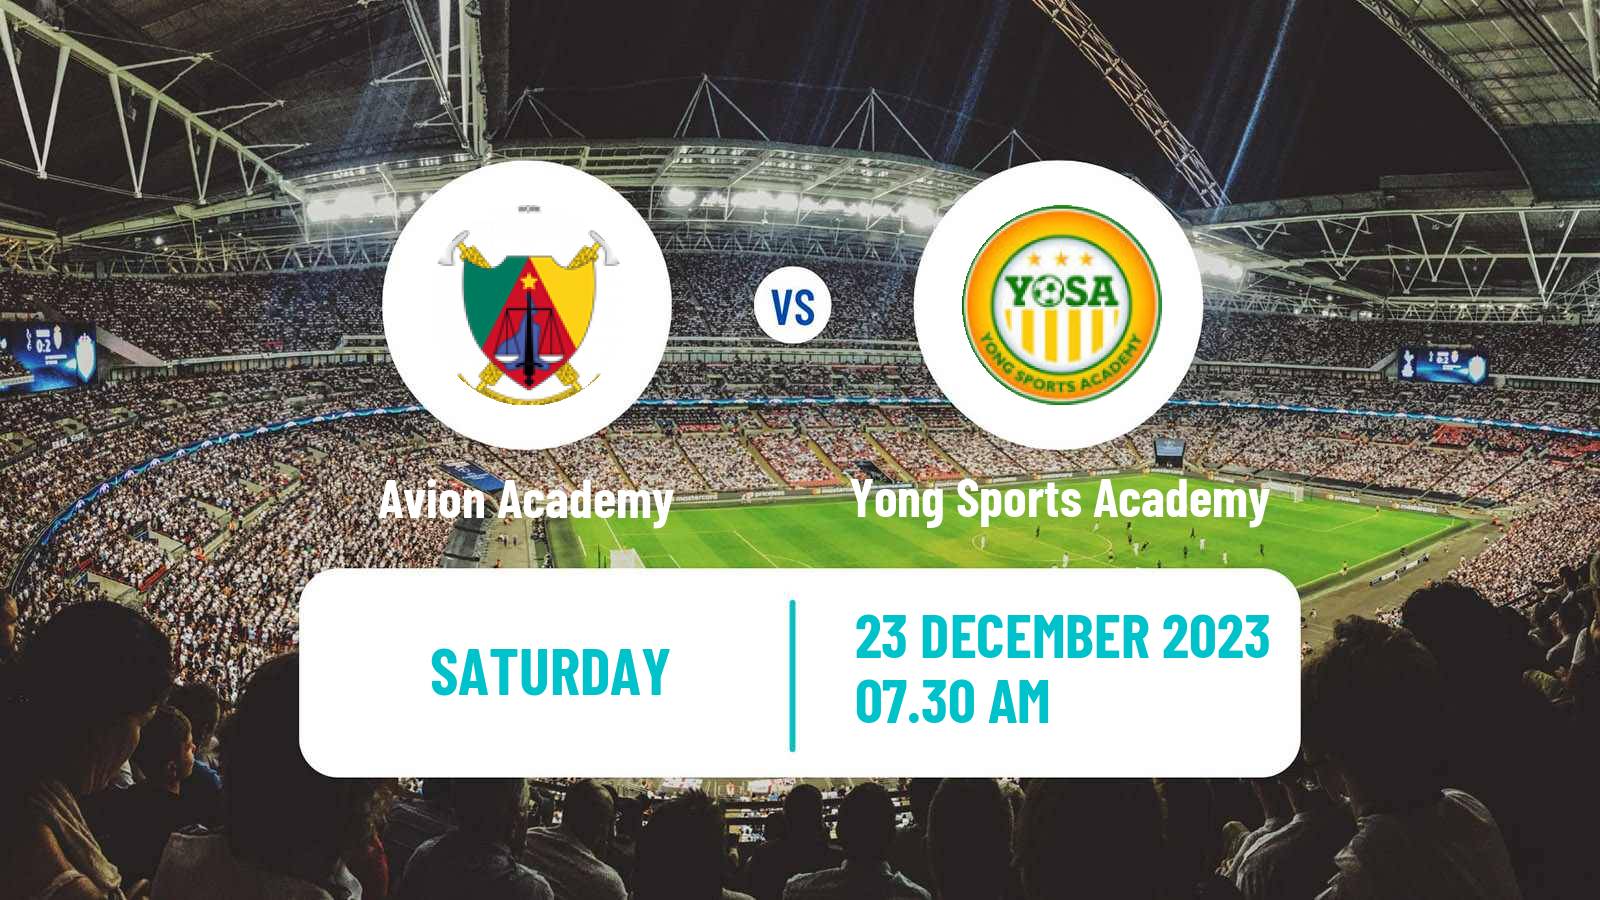 Soccer Cameroon Elite One Avion Academy - Yong Sports Academy